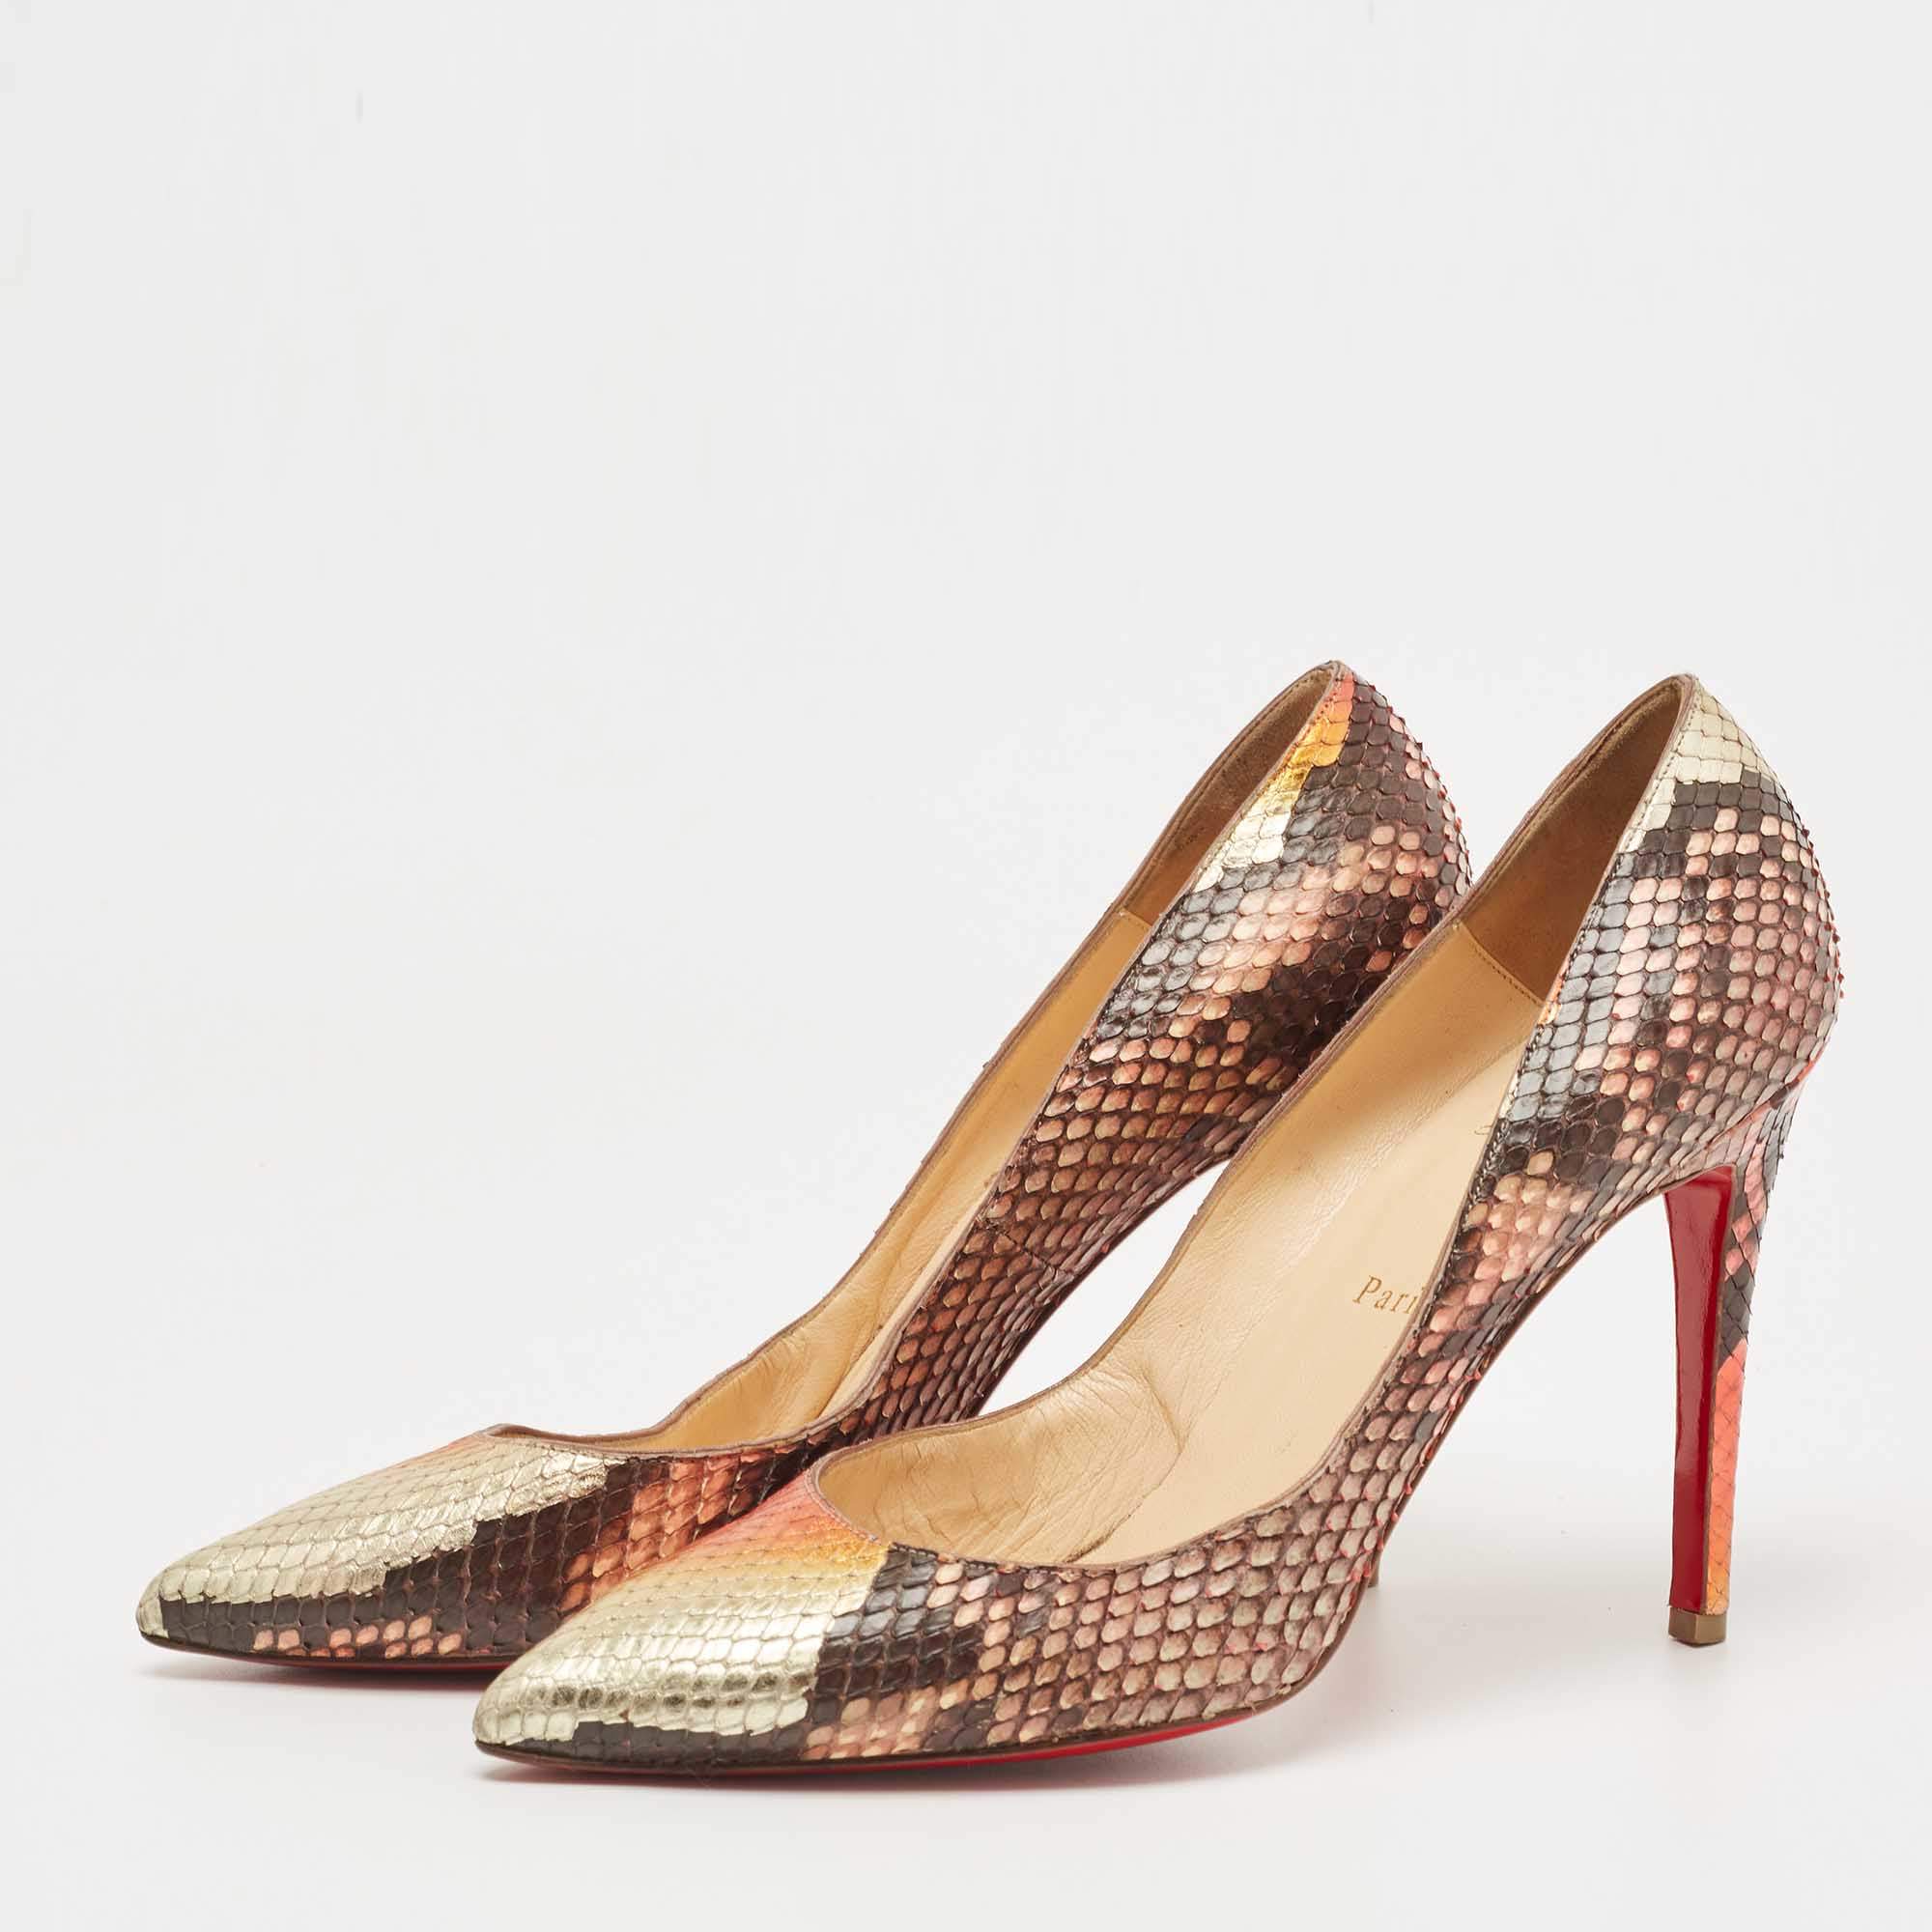 Louis Vuitton Pre-Loved Cherie slingback pumps for Women - Brown in Bahrain